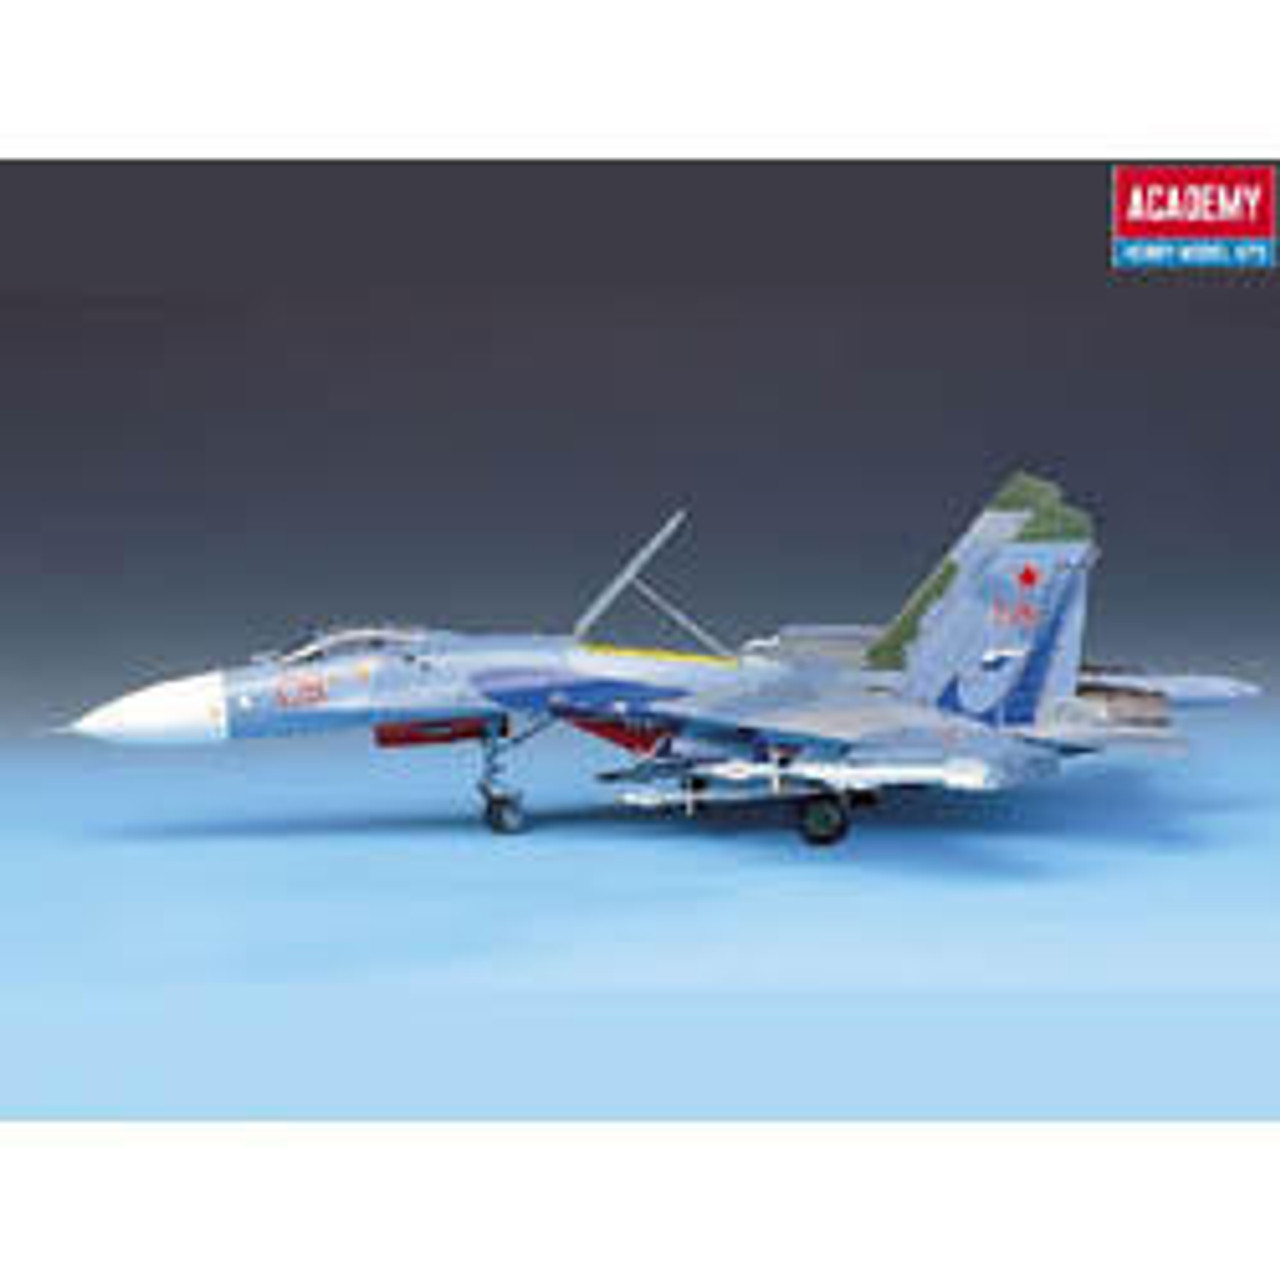 ACD12270 1/48 Academy Su27 Flanker Fighter MMD Squadron